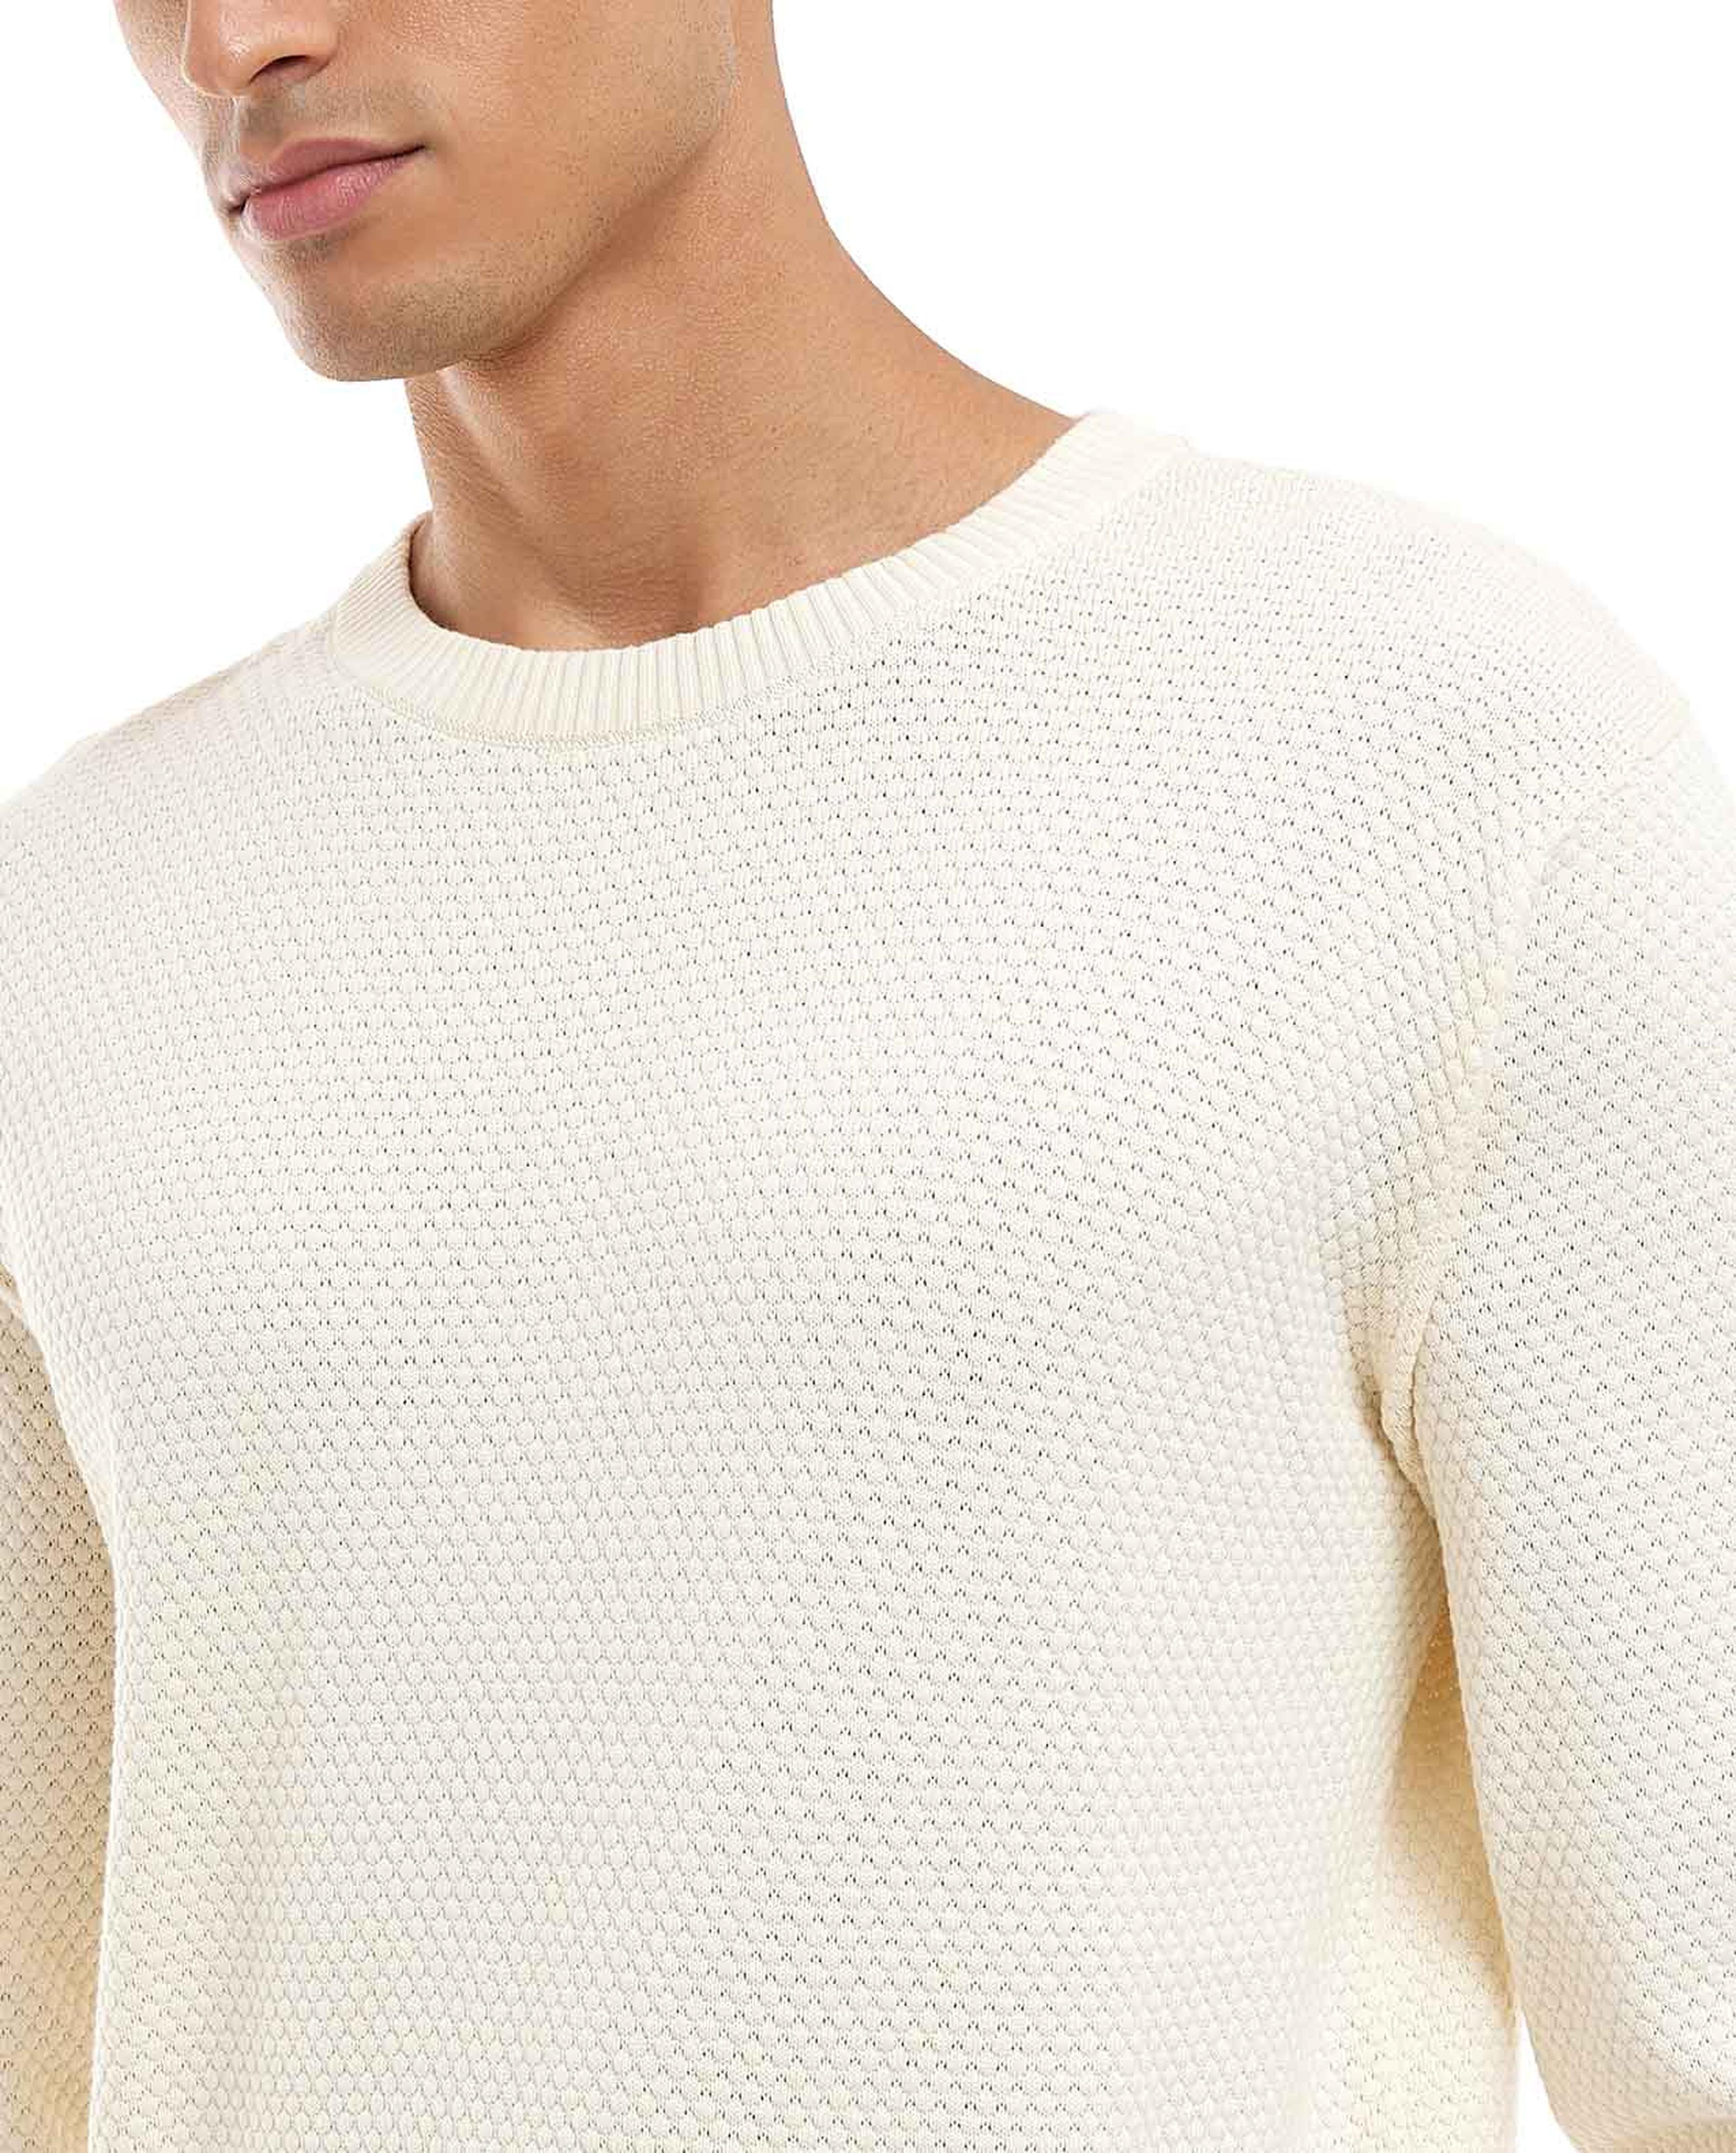 Textured Sweater with Crew Neck and Long Sleeves